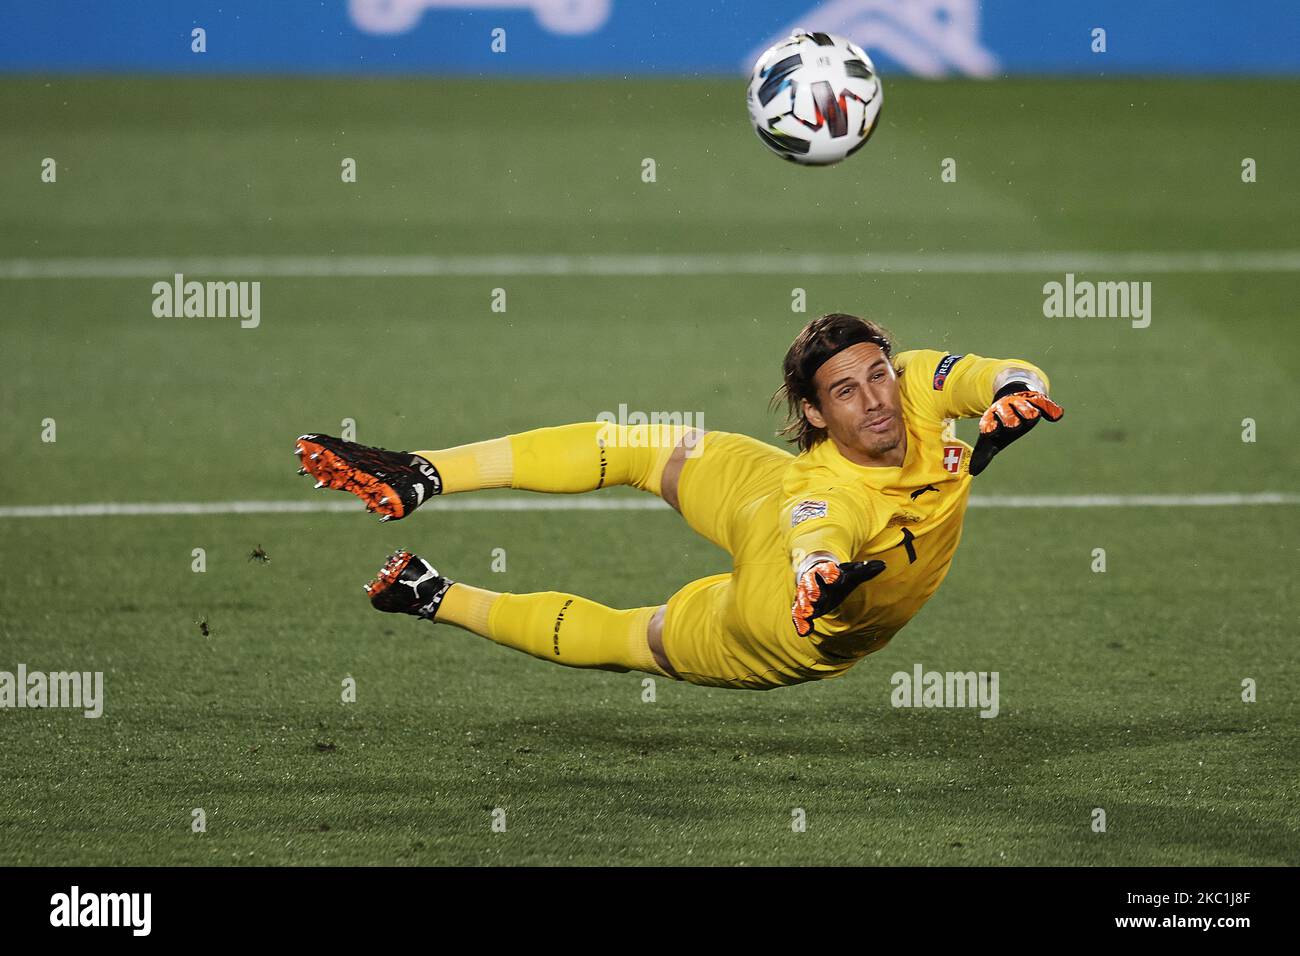 Yann Sommer (Borussia Monchengladbach) of Switzerlandmakes a save during the UEFA Nations League group stage match between Spain and Switzerland at Estadio Alfredo Di Stefano on October 10, 2020 in Madrid, Spain. (Photo by Jose Breton/Pics Action/NurPhoto) Stock Photo